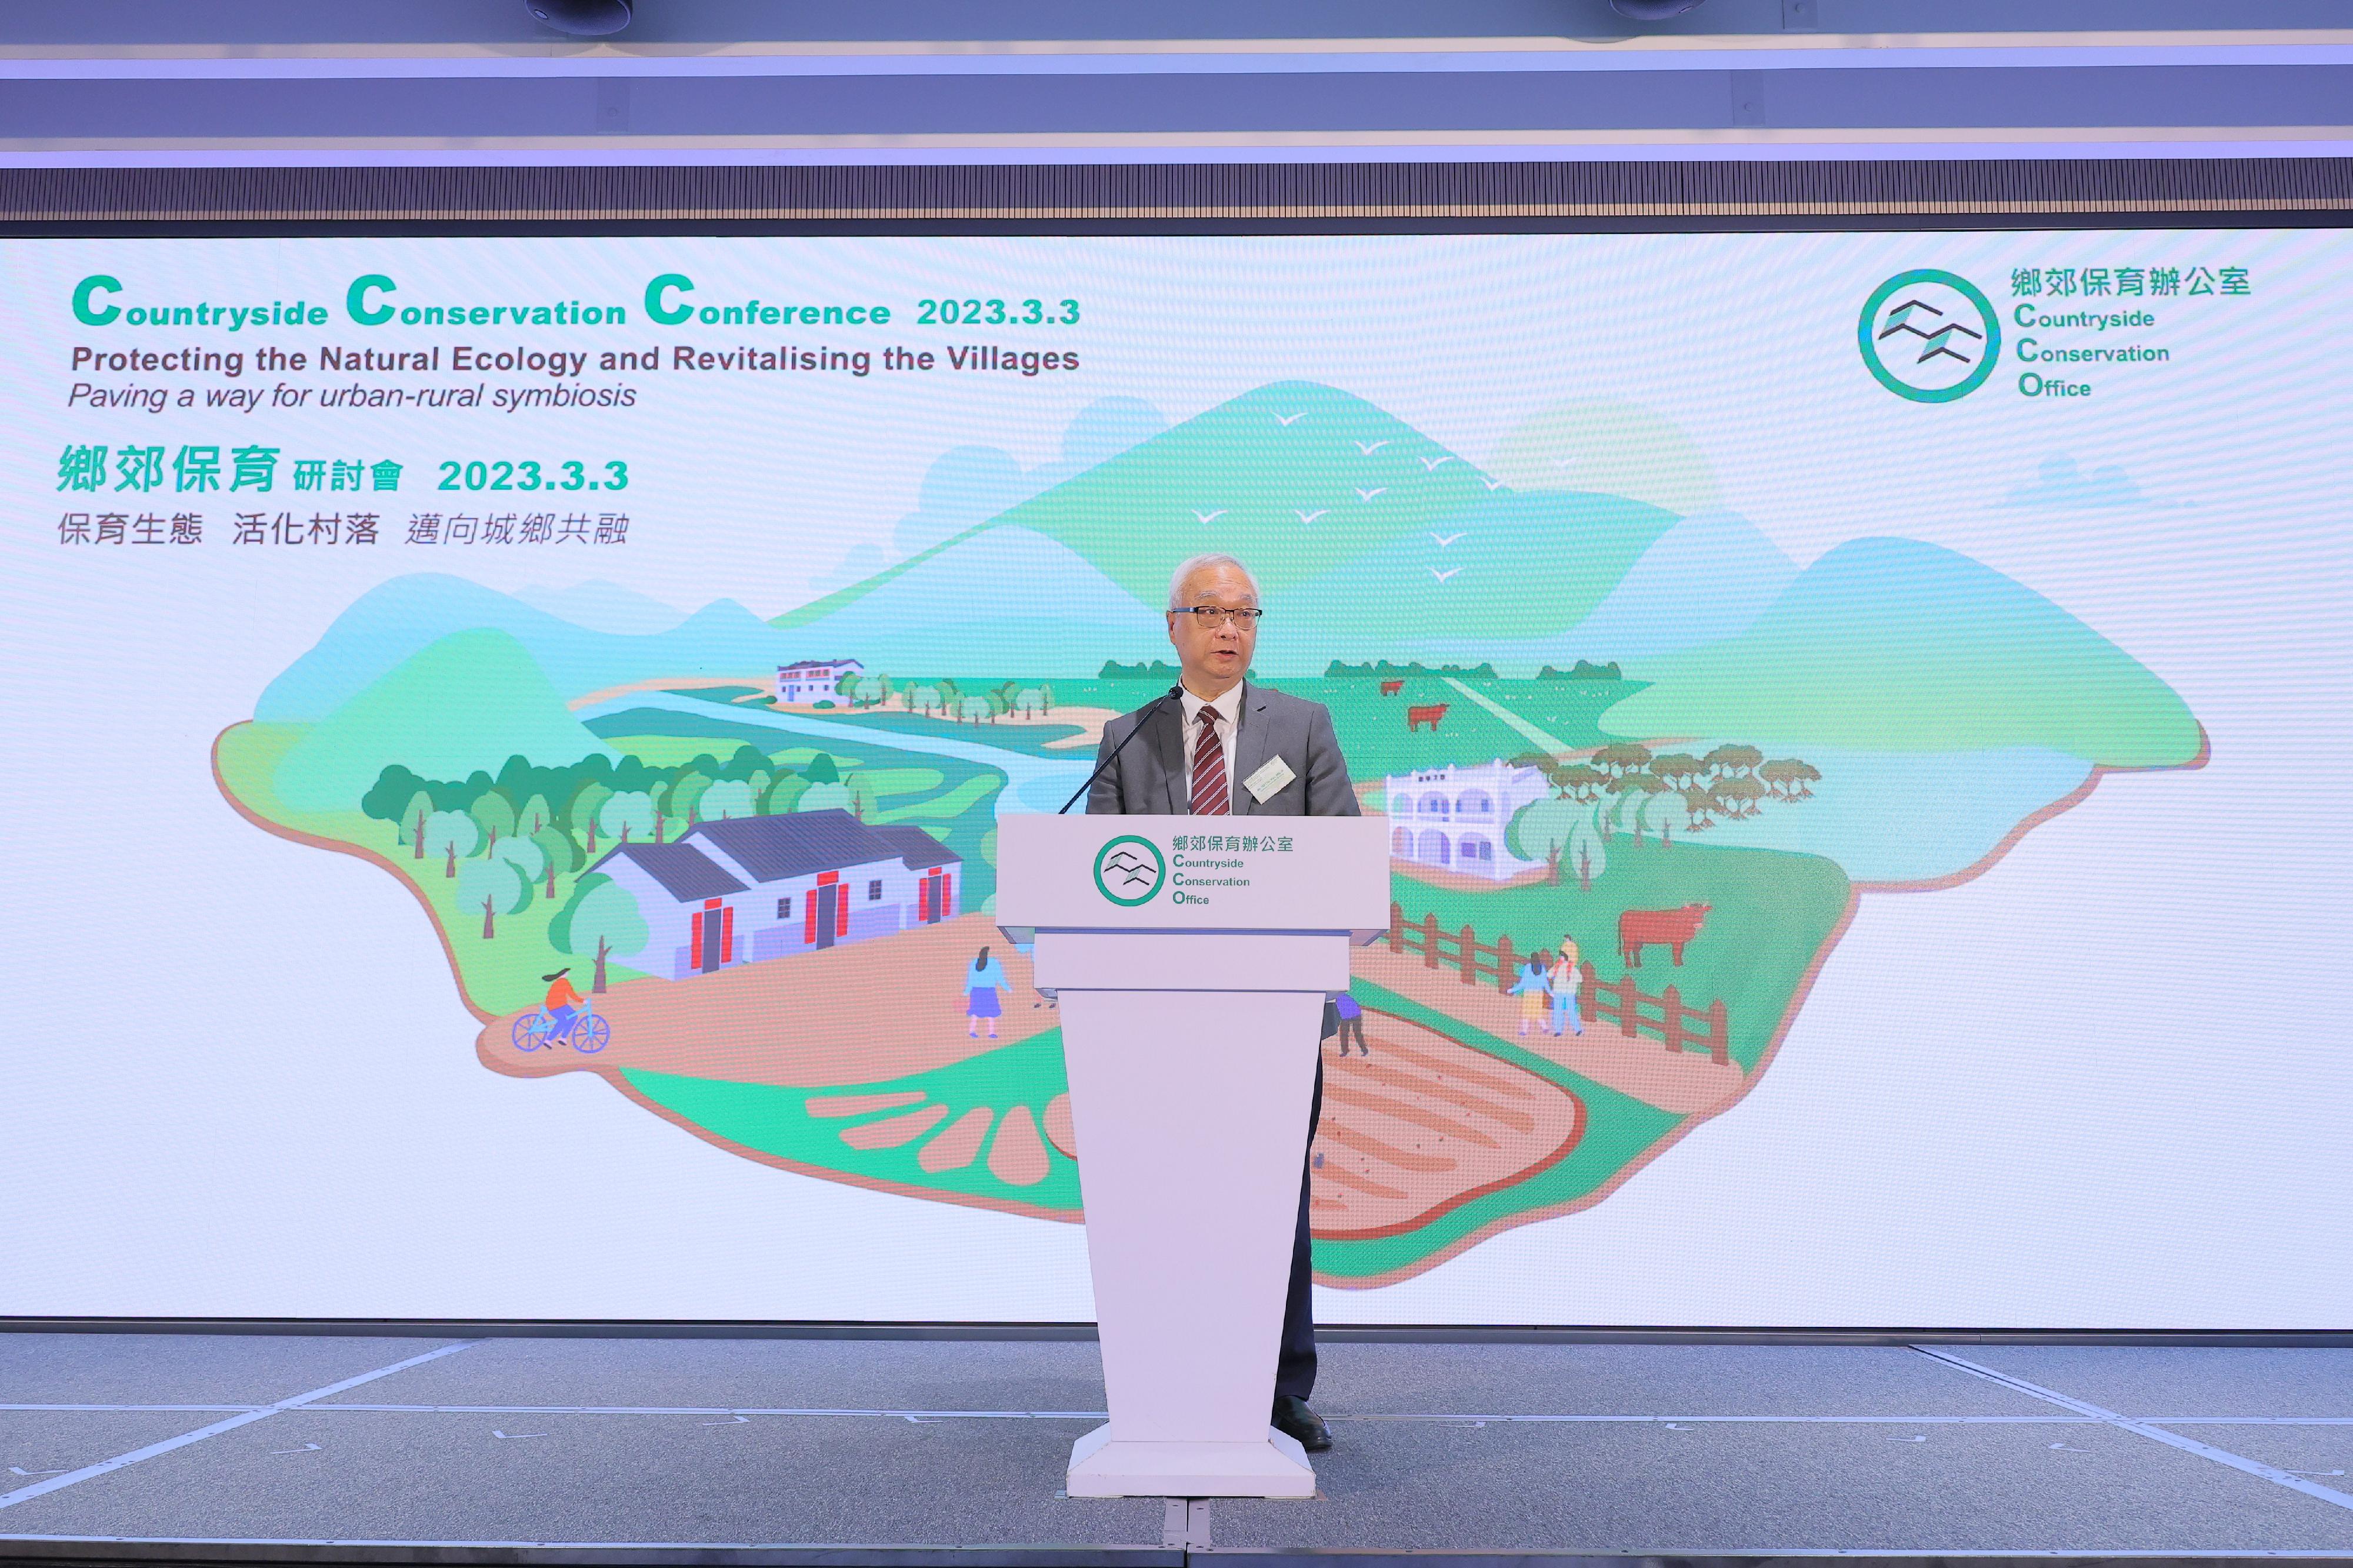 The Countryside Conservation Office held the Countryside Conservation Conference 2023 today (March 3) in a hybrid format at the Zero Carbon Park and online. Photo shows the Secretary for Environment and Ecology, Mr Tse Chin-wan, delivering his opening remarks at the conference.